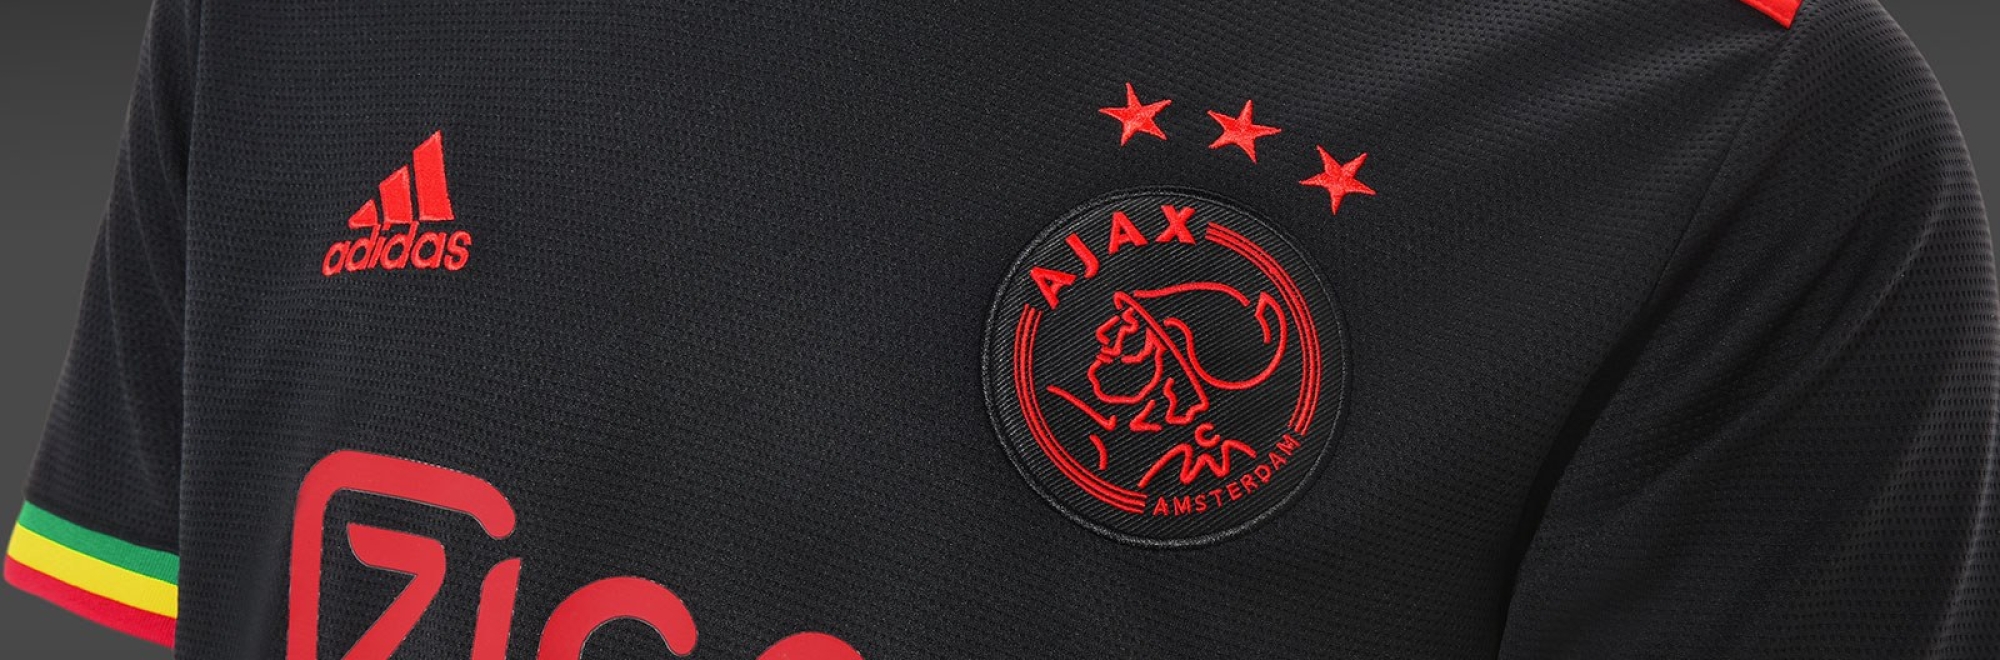 Adidas helps Ajax achieve icon status yet again with Bob Marley inspired kit